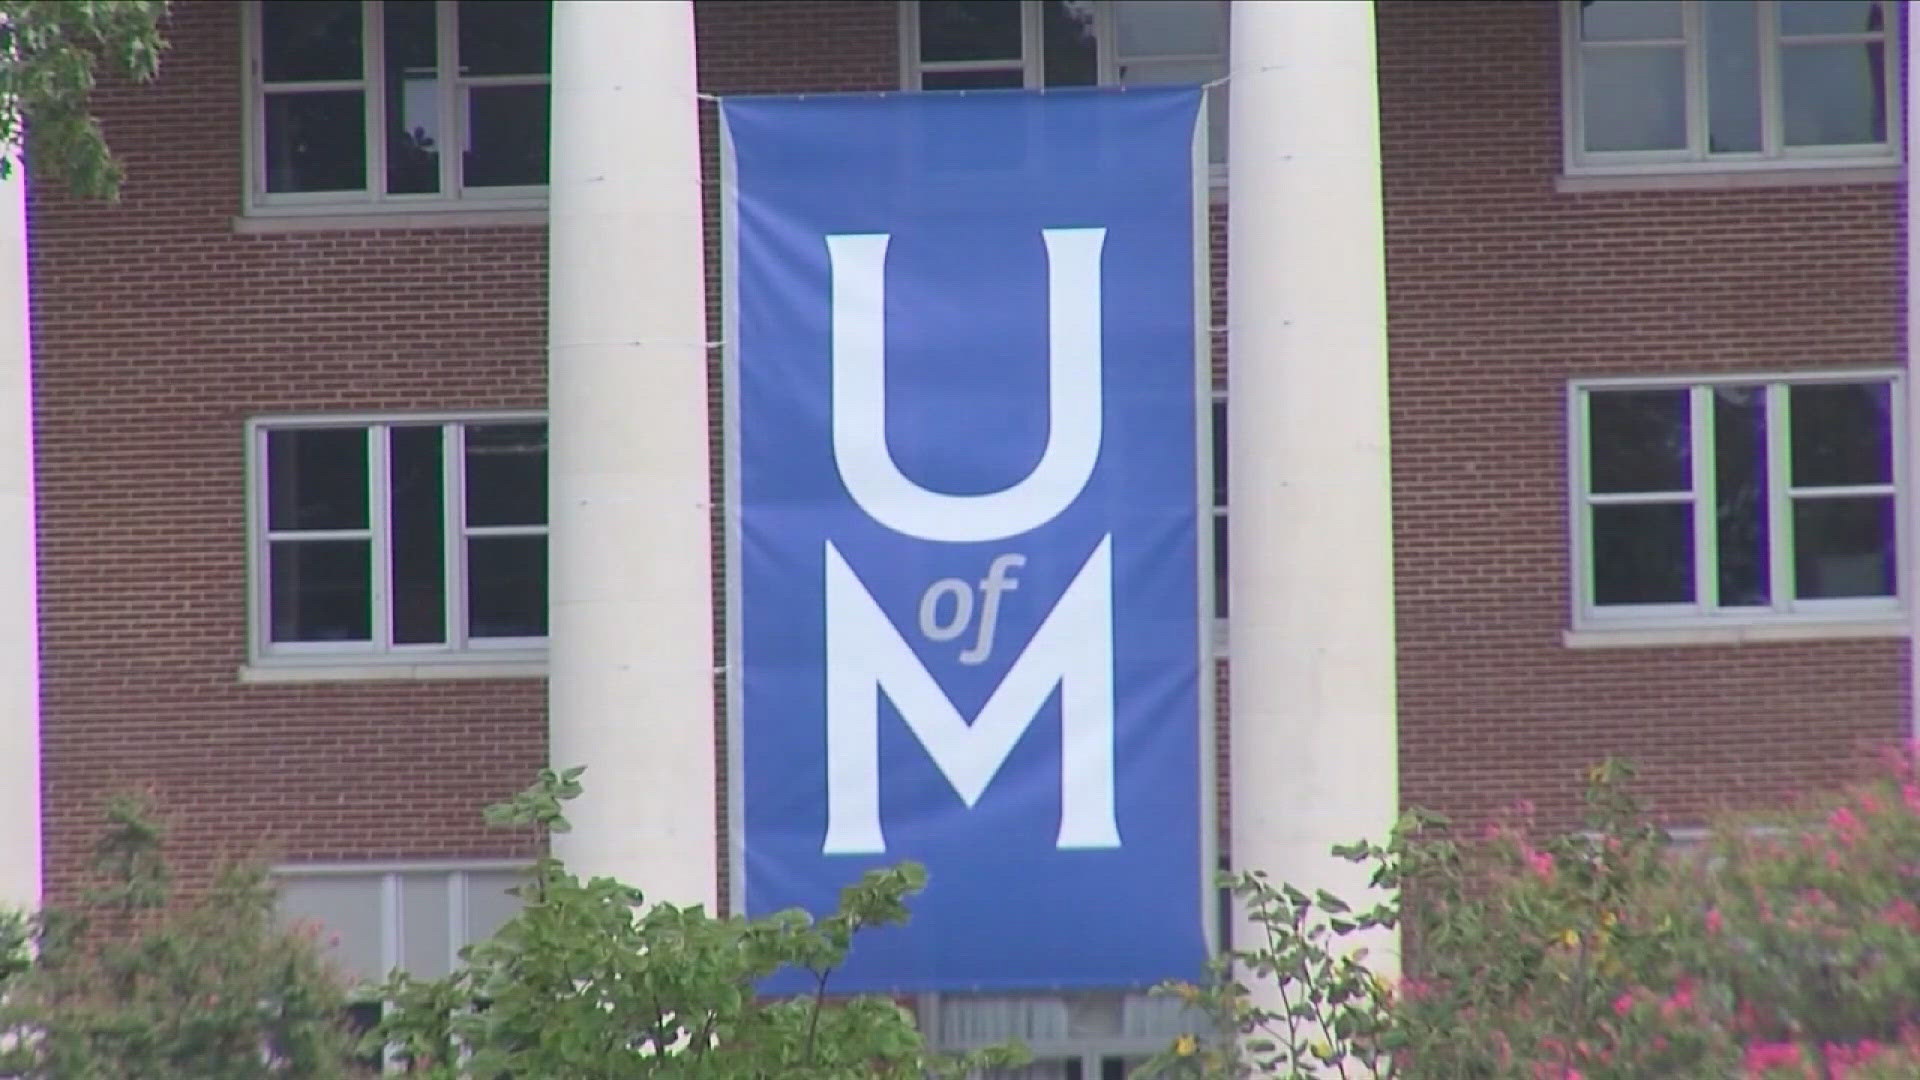 On Thursday, May 2, the University of Memphis announced that they have begun the search for a new athletic director.